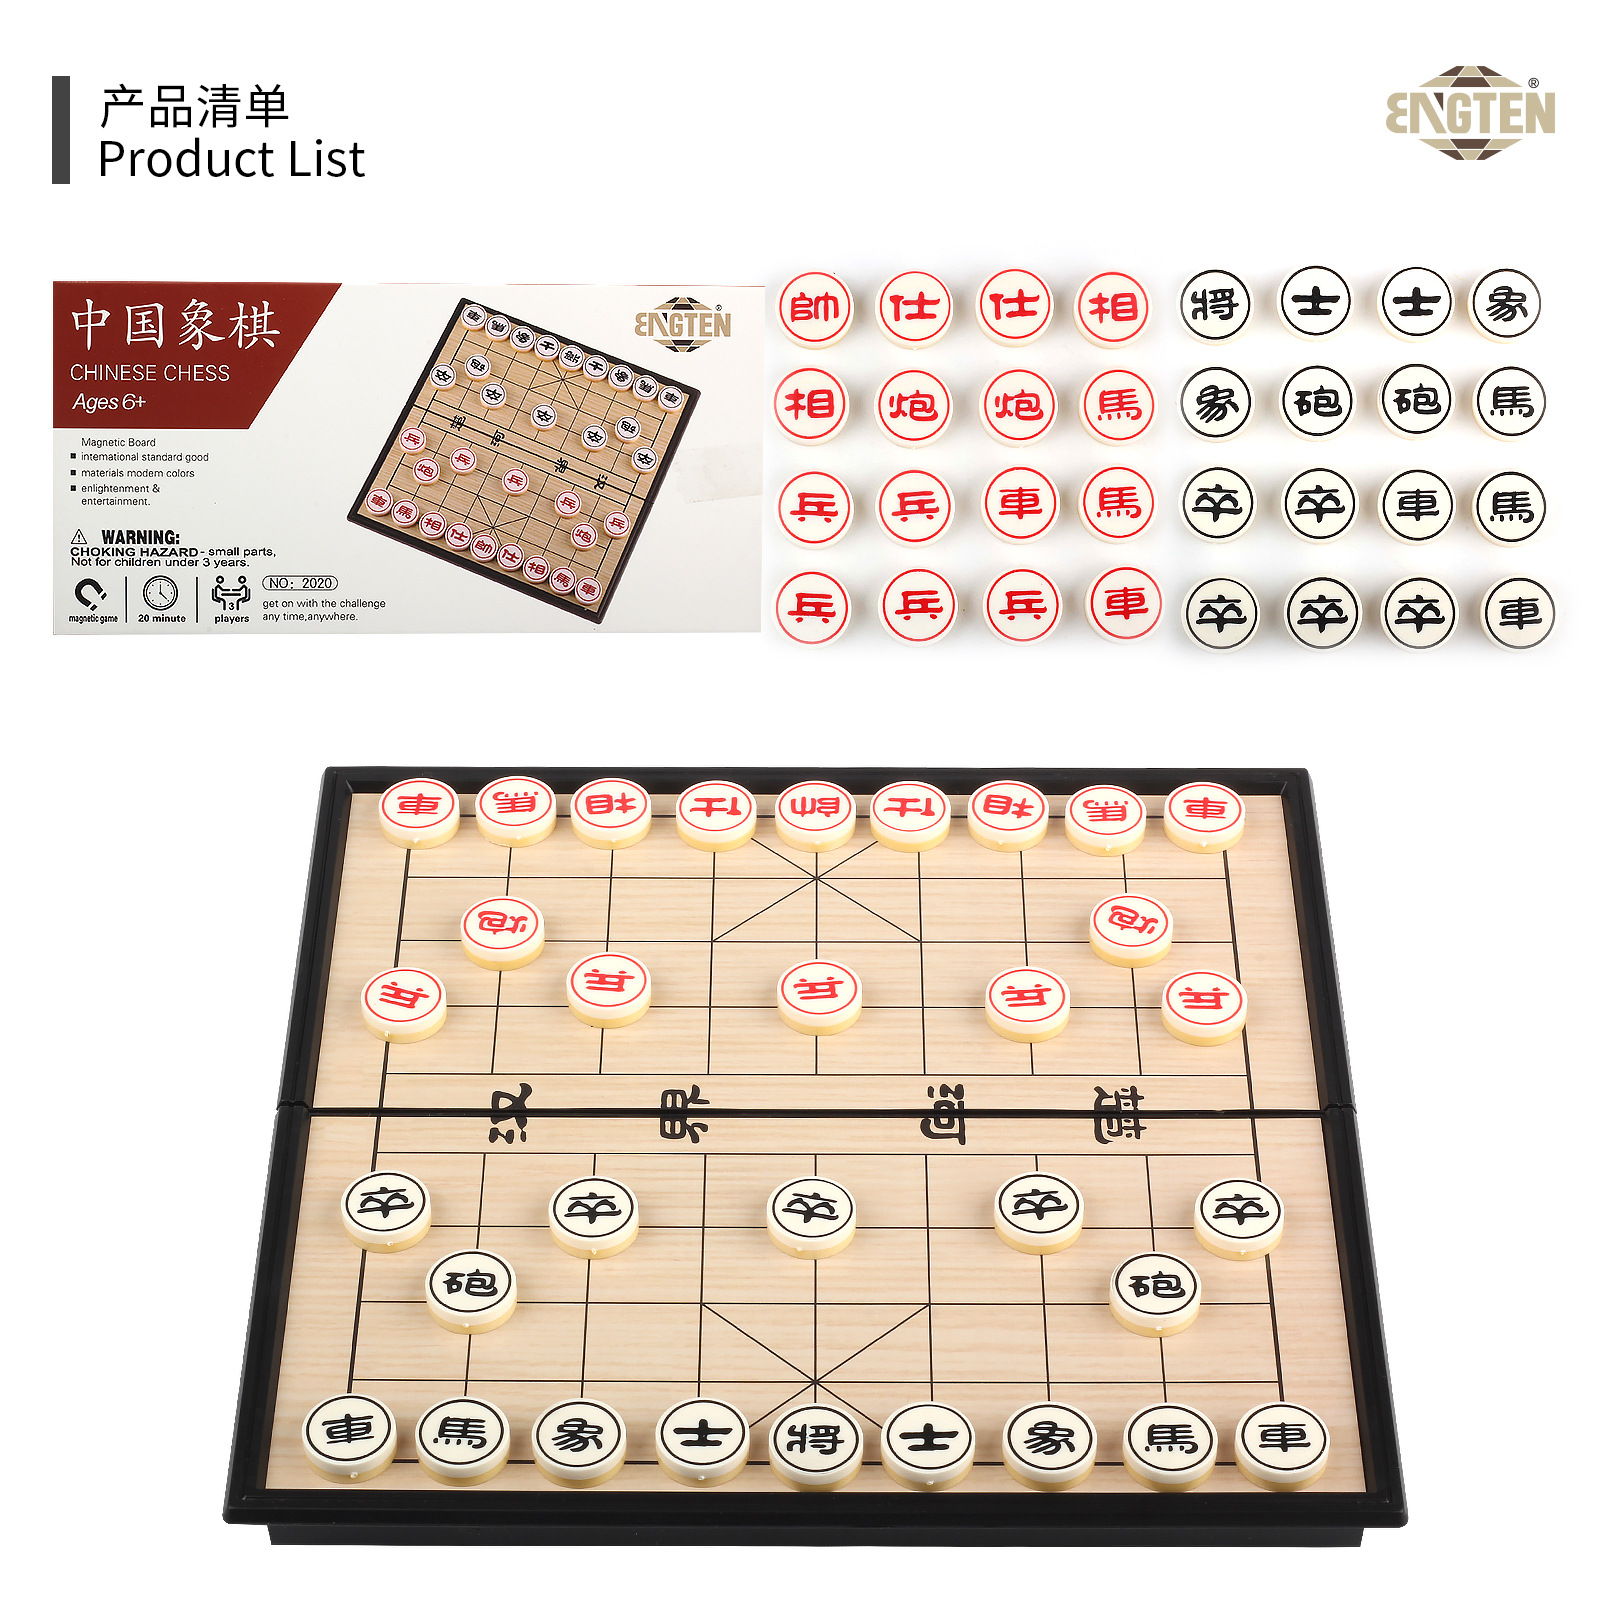 BT Small Size Magnetic Chinese Chess Portable Folding Chess Box Children Student Education Intelligence Development Cultivate Interest